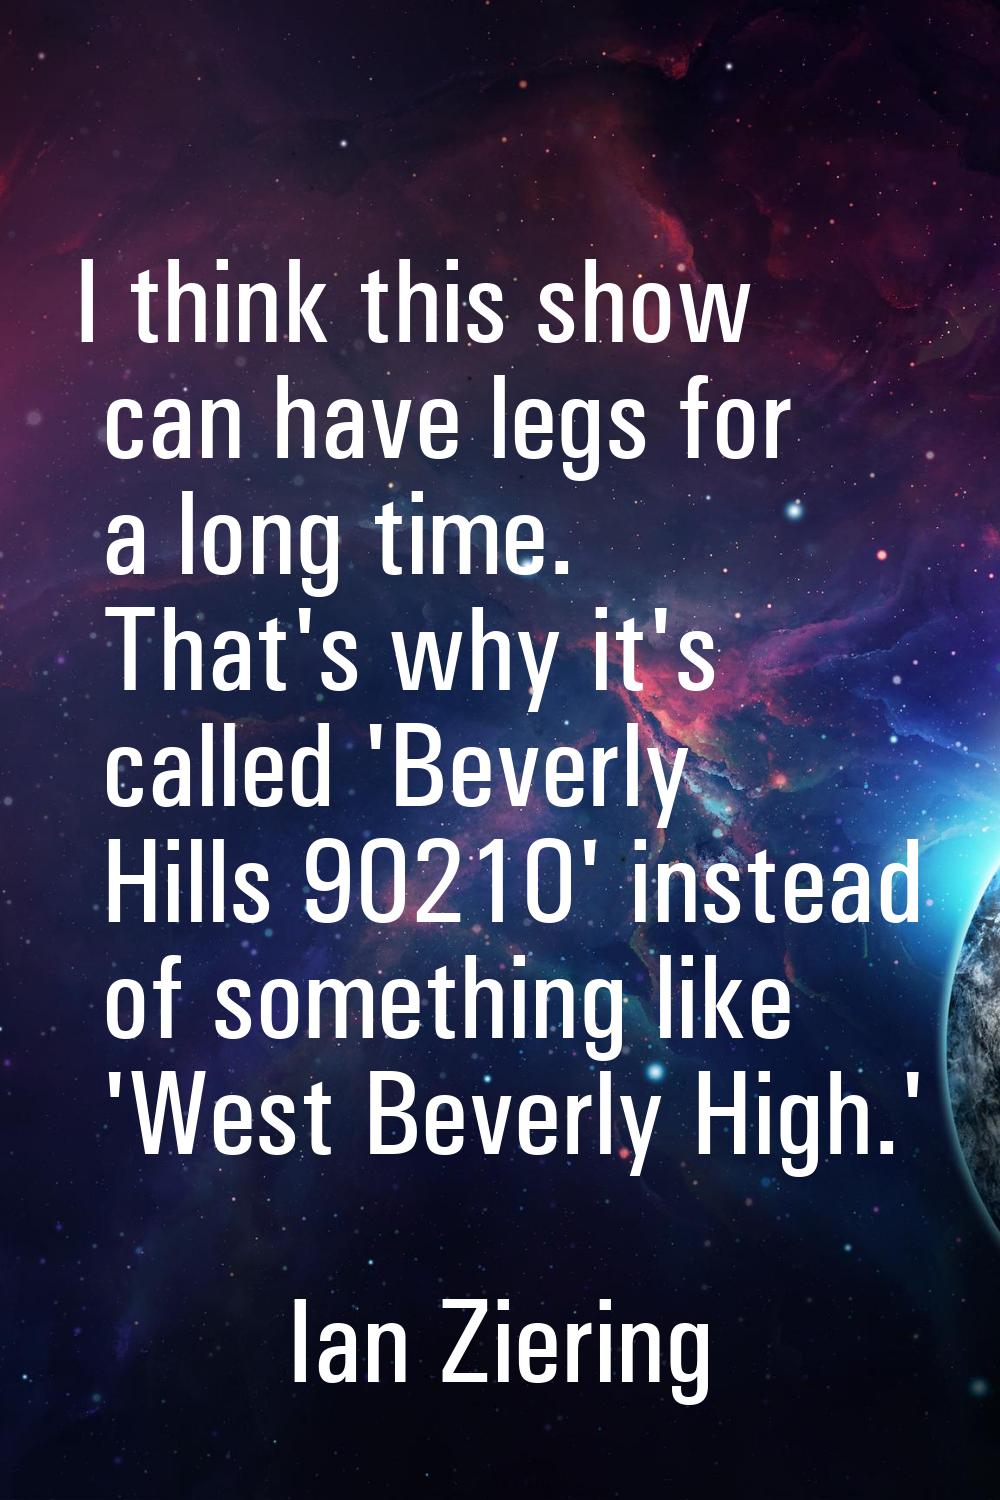 I think this show can have legs for a long time. That's why it's called 'Beverly Hills 90210' inste